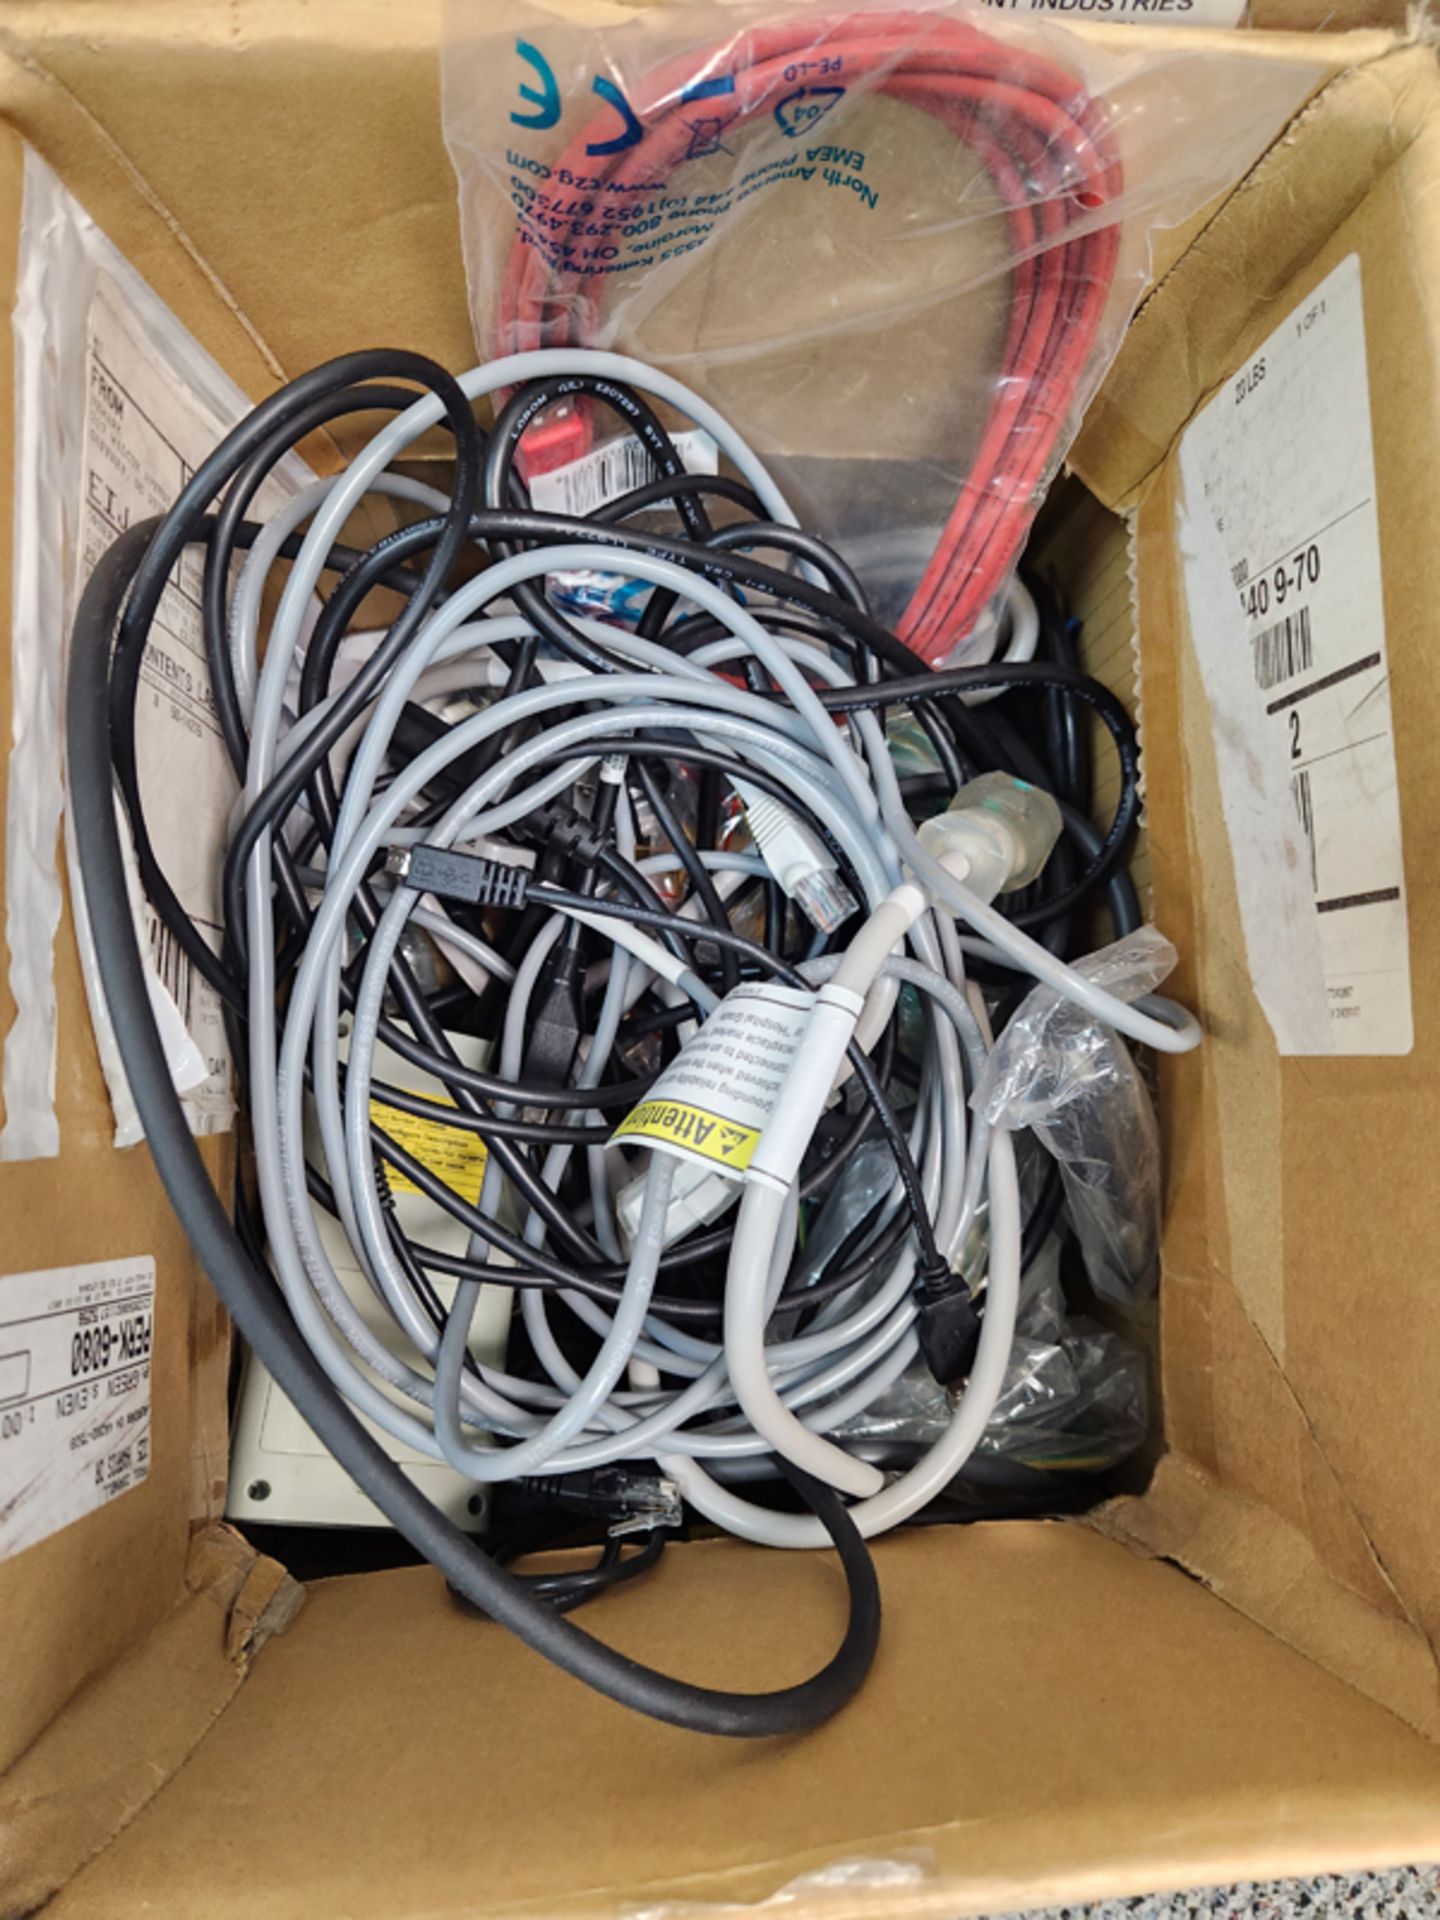 LOT OF ASSORTED POWER CORDS AND MISC IN 3 BOXES - Image 2 of 4